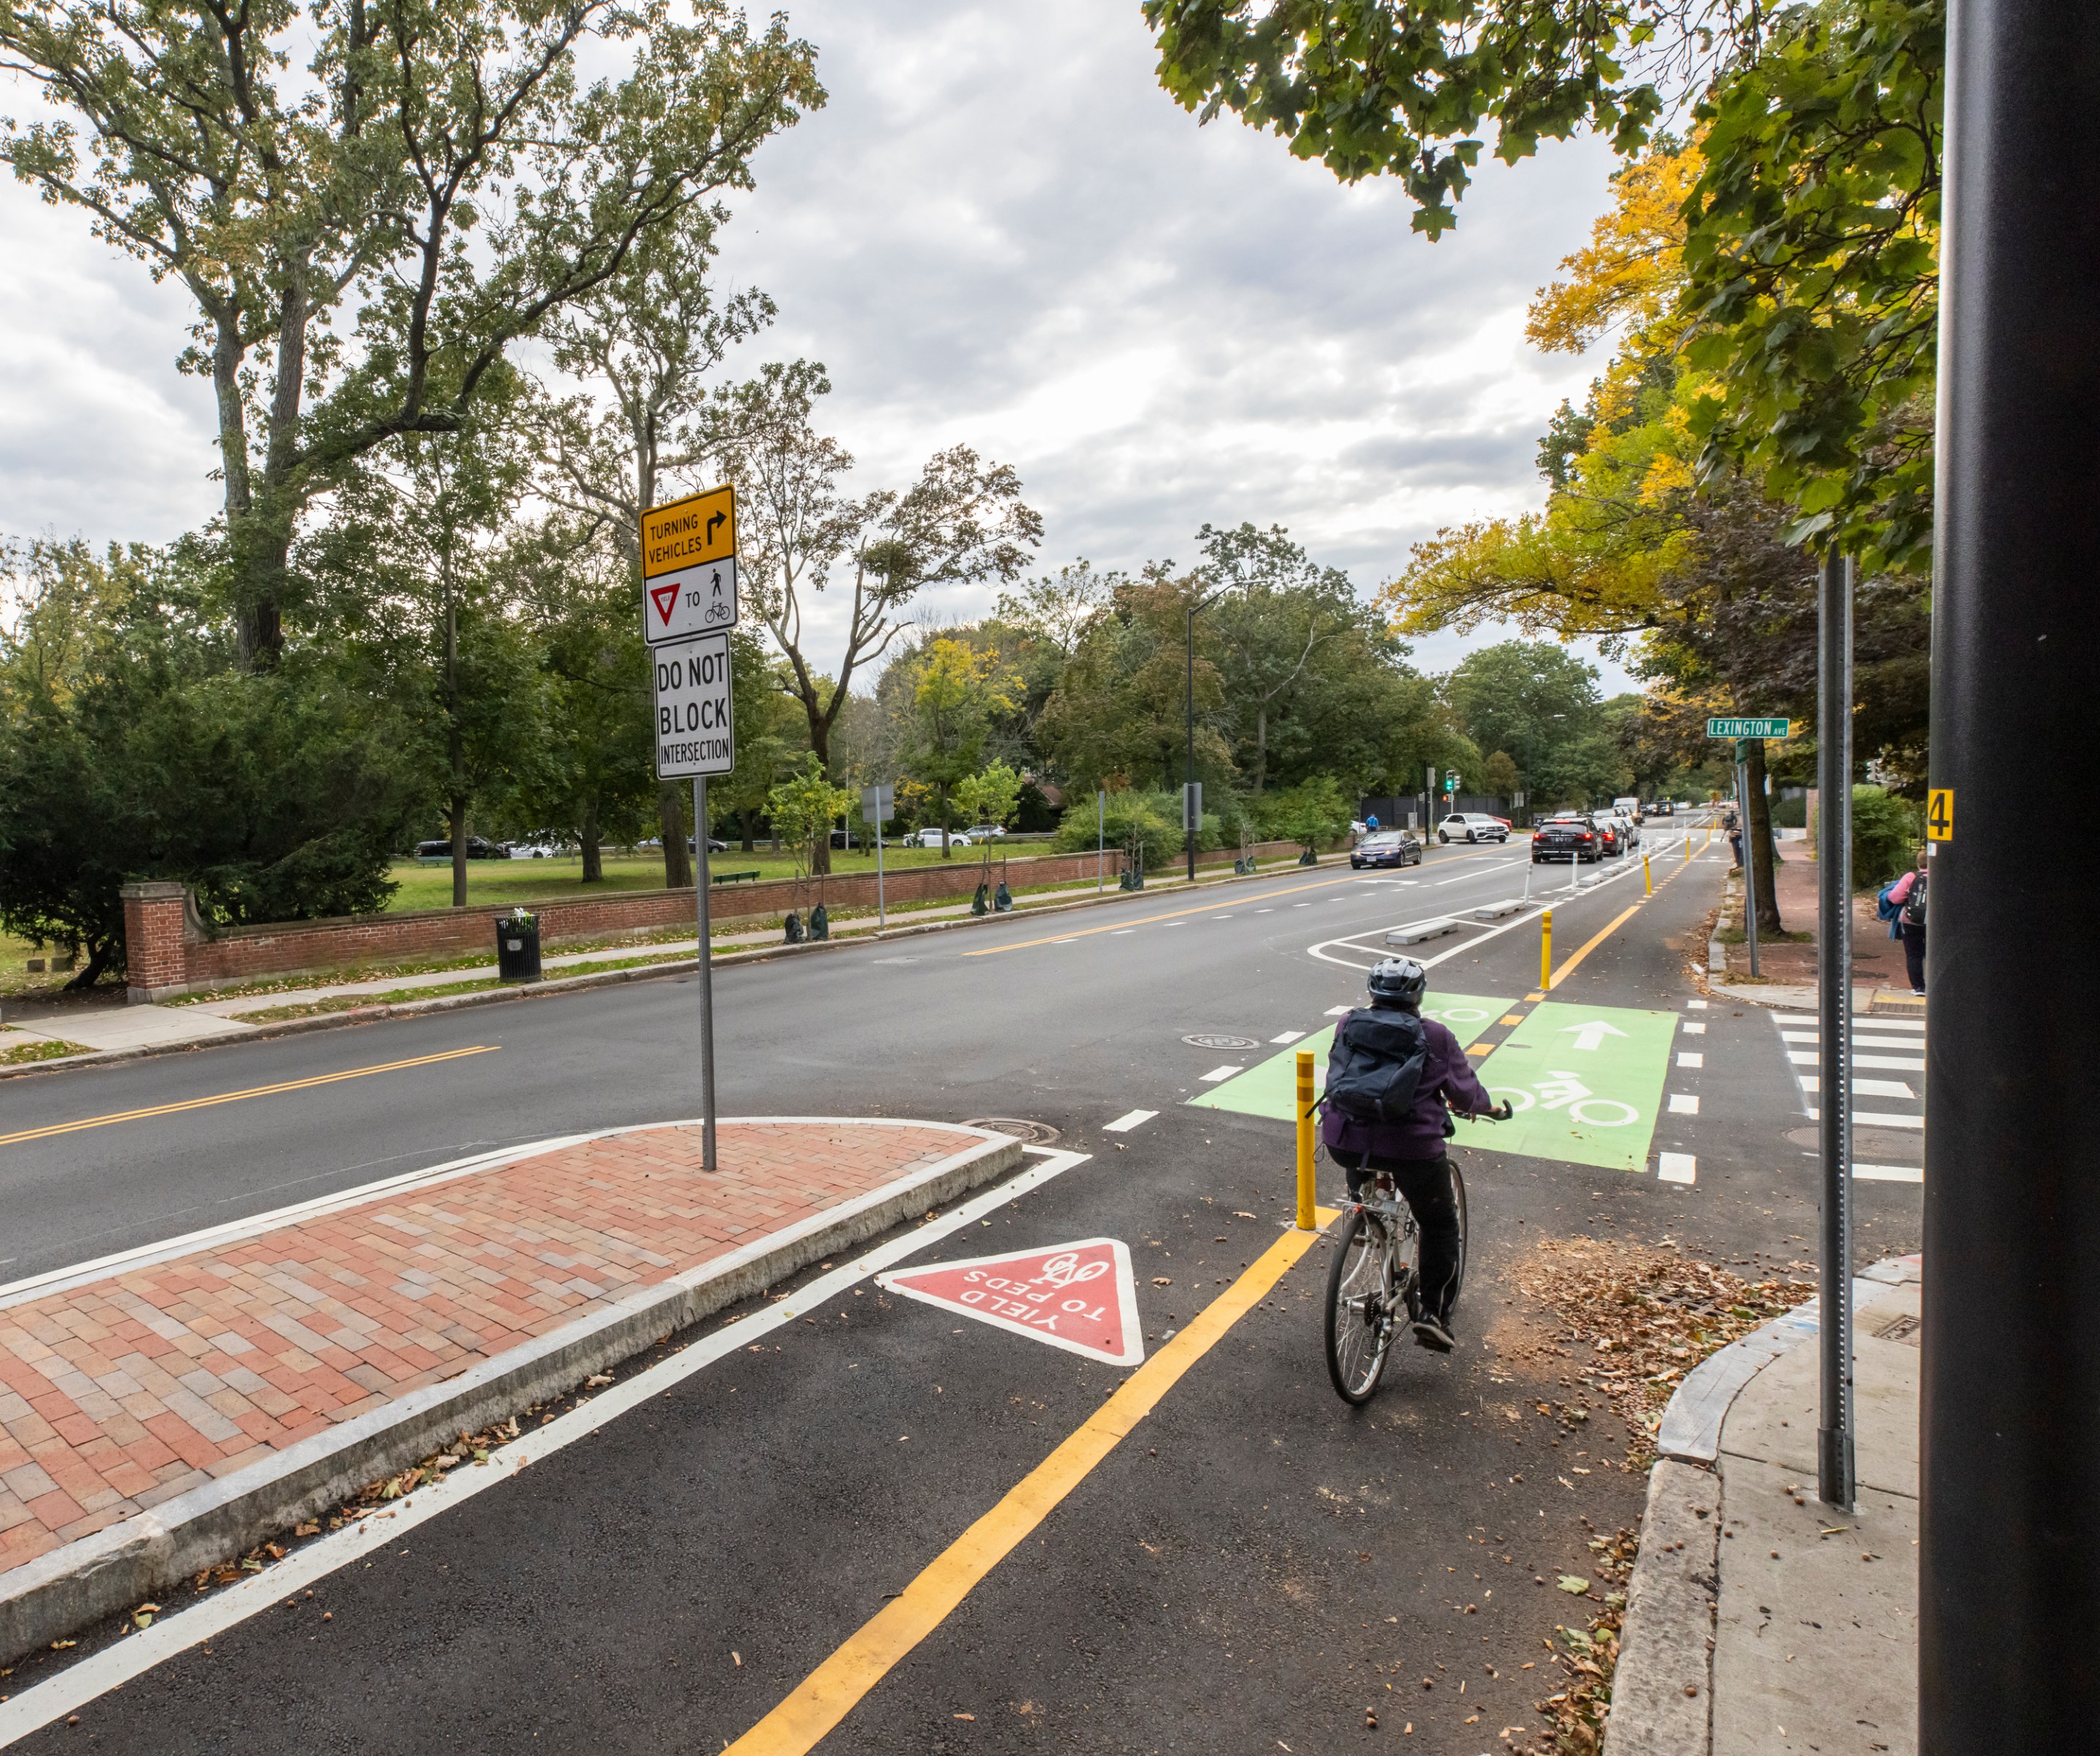 A person wearing black pedals a bike away from the camera on a wide street lined with trees beginning to turn yellow in the autumn. The rider is using a protected bike path that's separated from the adjacent car lanes by barriers including a brick-paved median island in the lower left foreground.